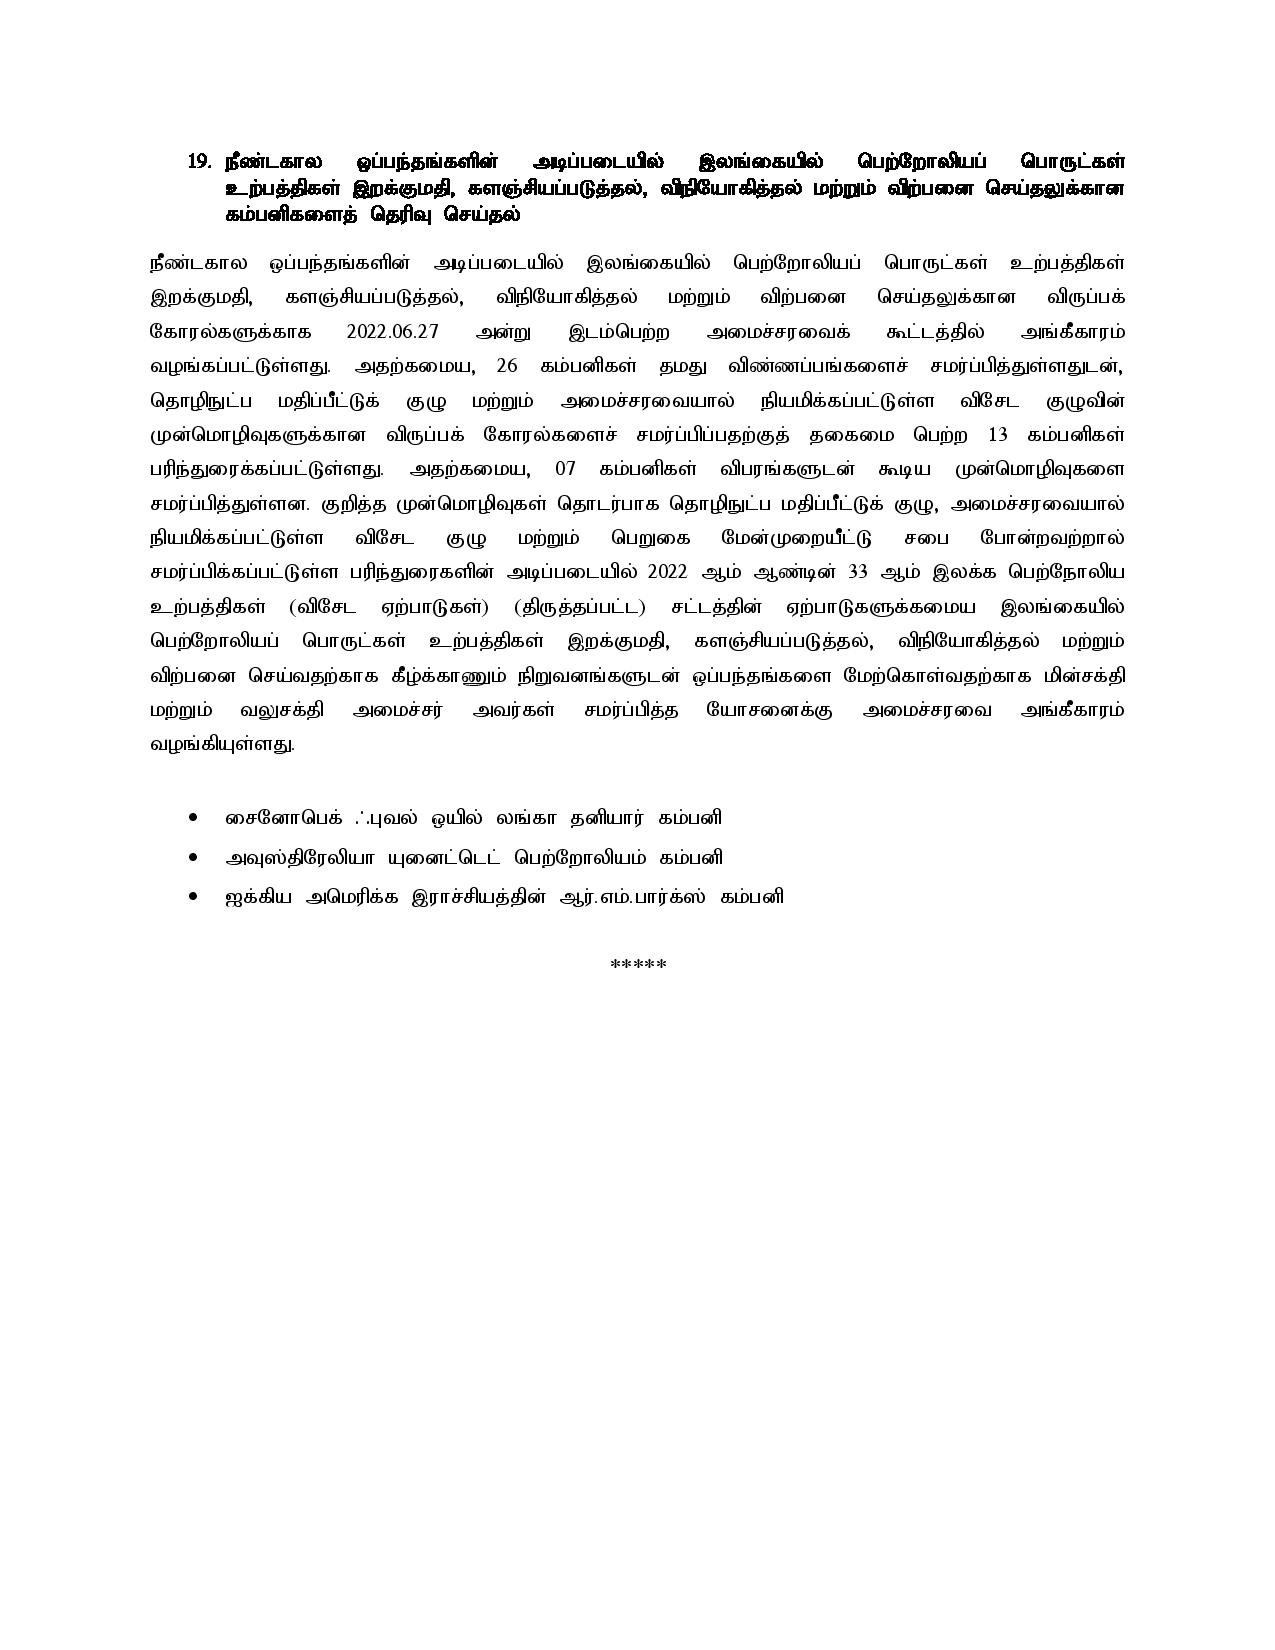 Cabinet Decisions on 27.03.2023 Tamil page 007